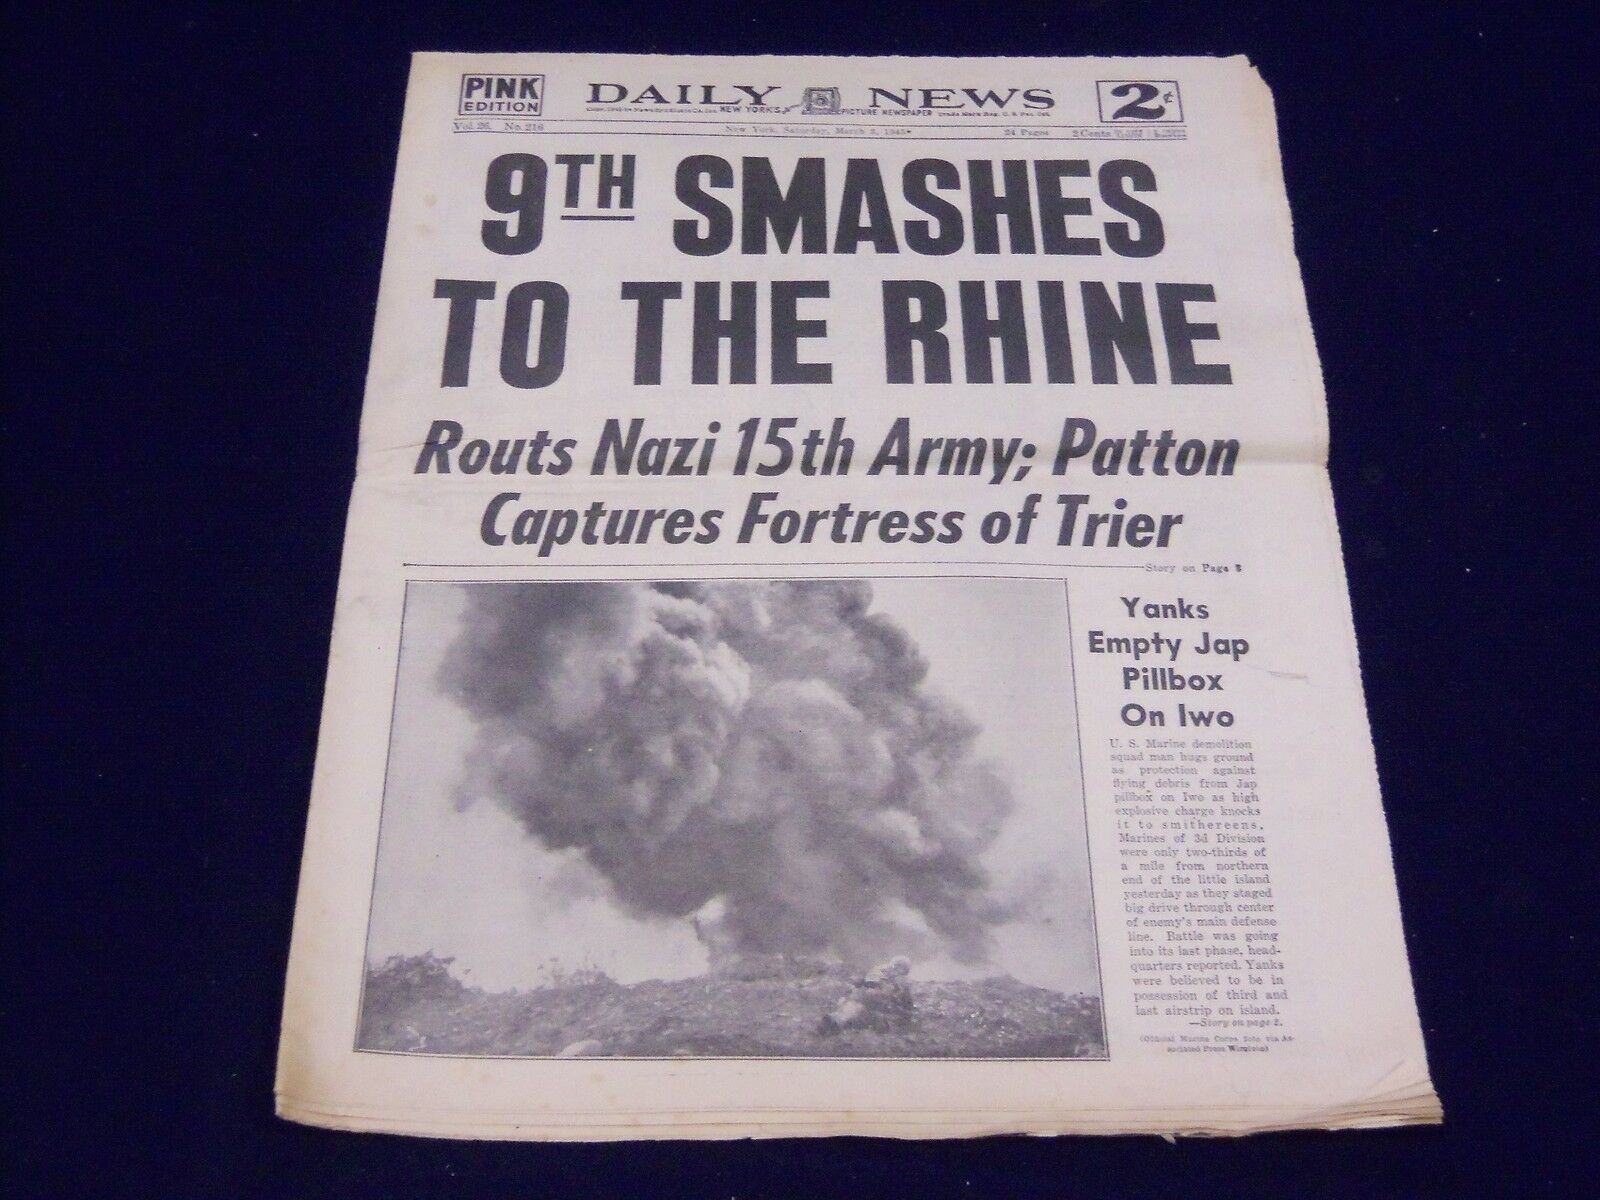 1945 MARCH 3 NEW YORK DAILY NEWS - 9TH SMASHES TO RHINE - NP 1995